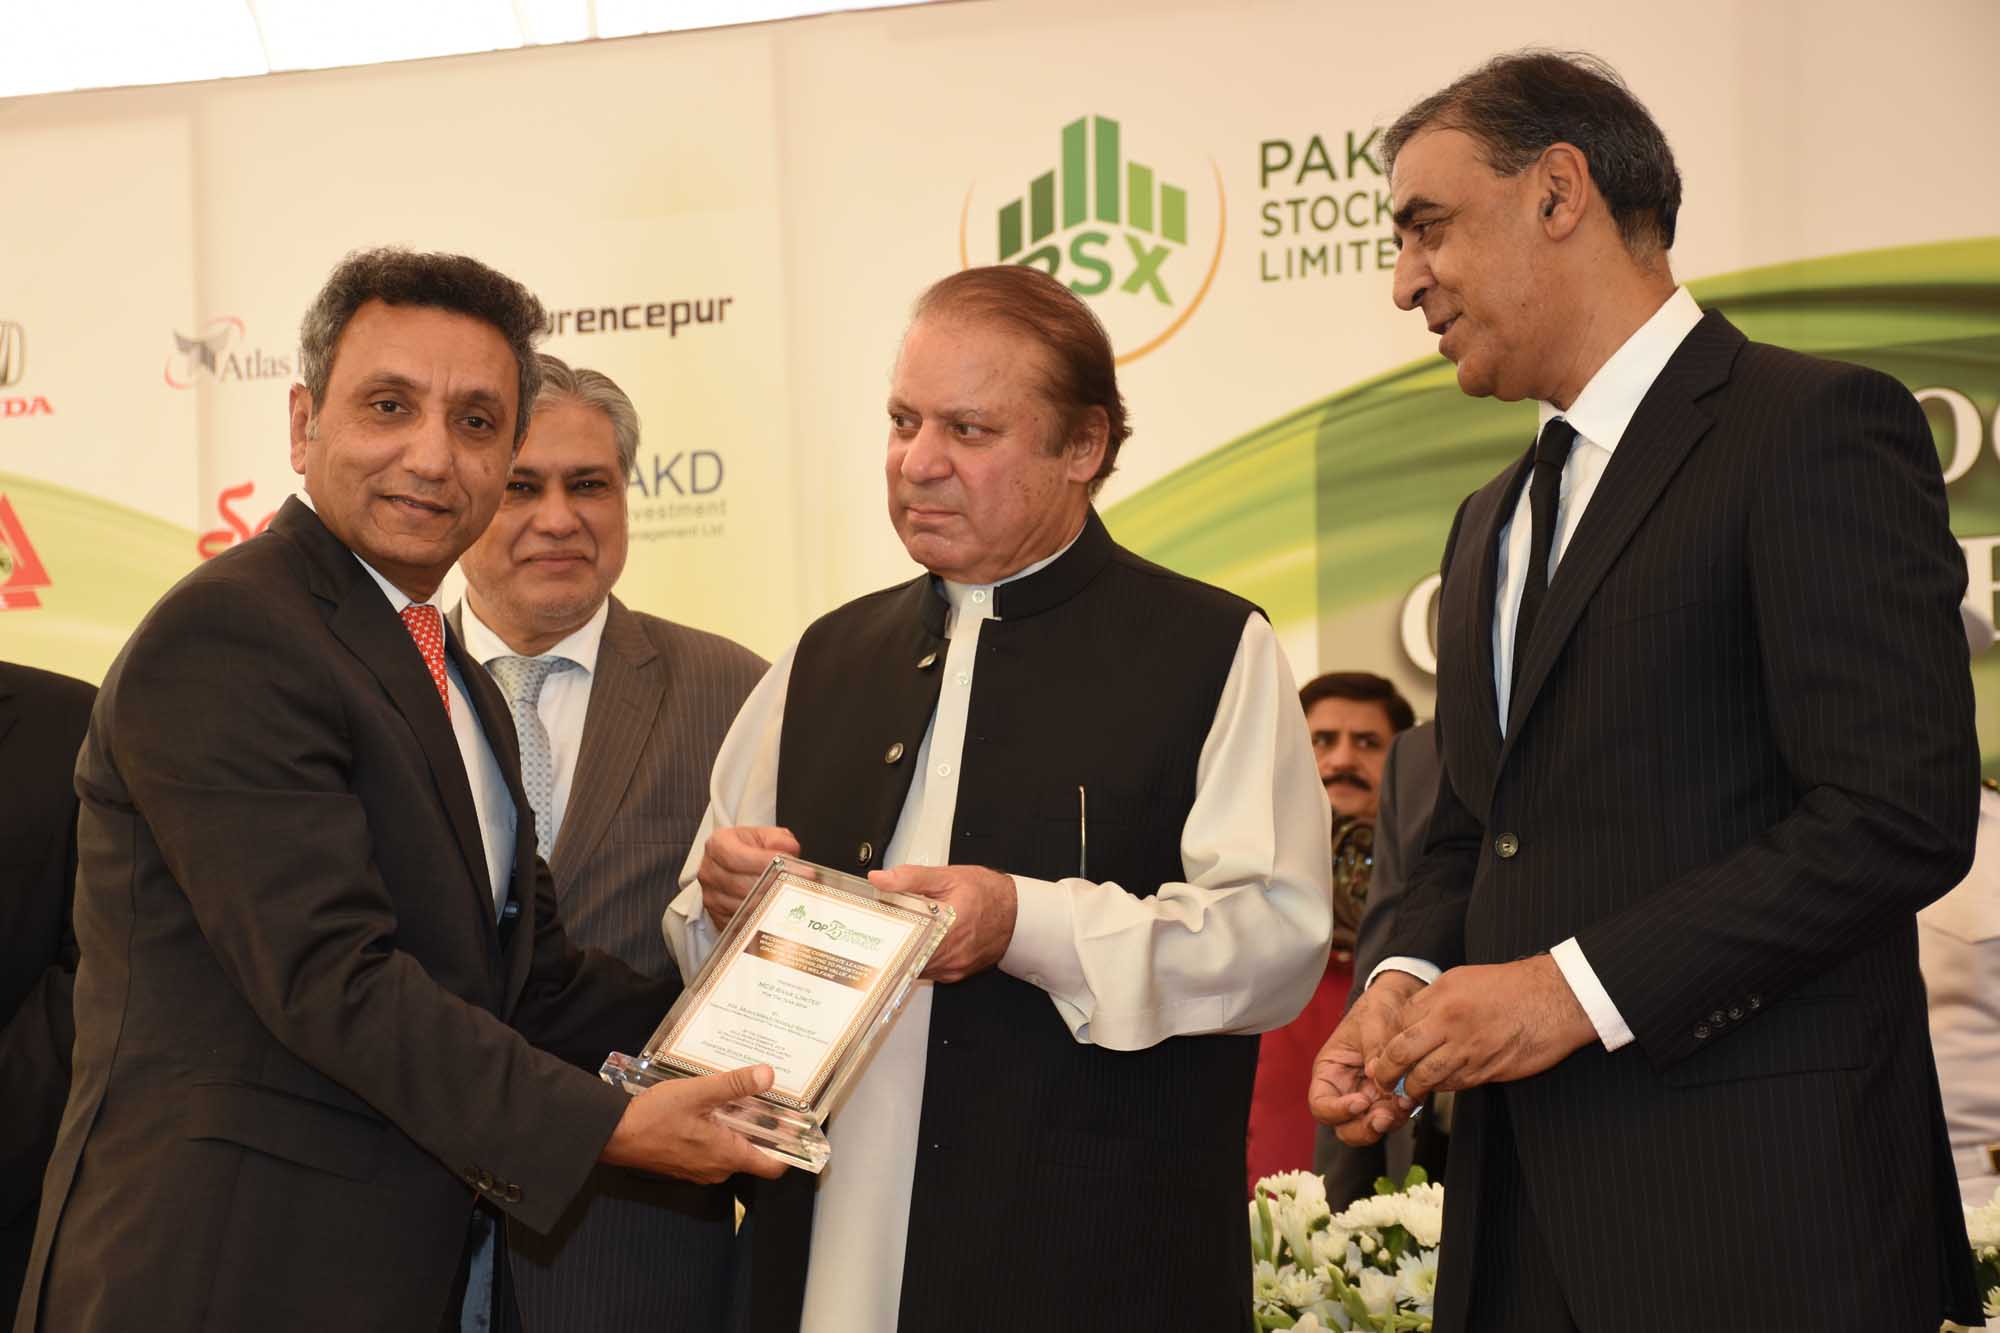 MCB Bank Limited Honoured As One Of Pakistan Stock Exchange’s Top 25 companies in 2014-2015